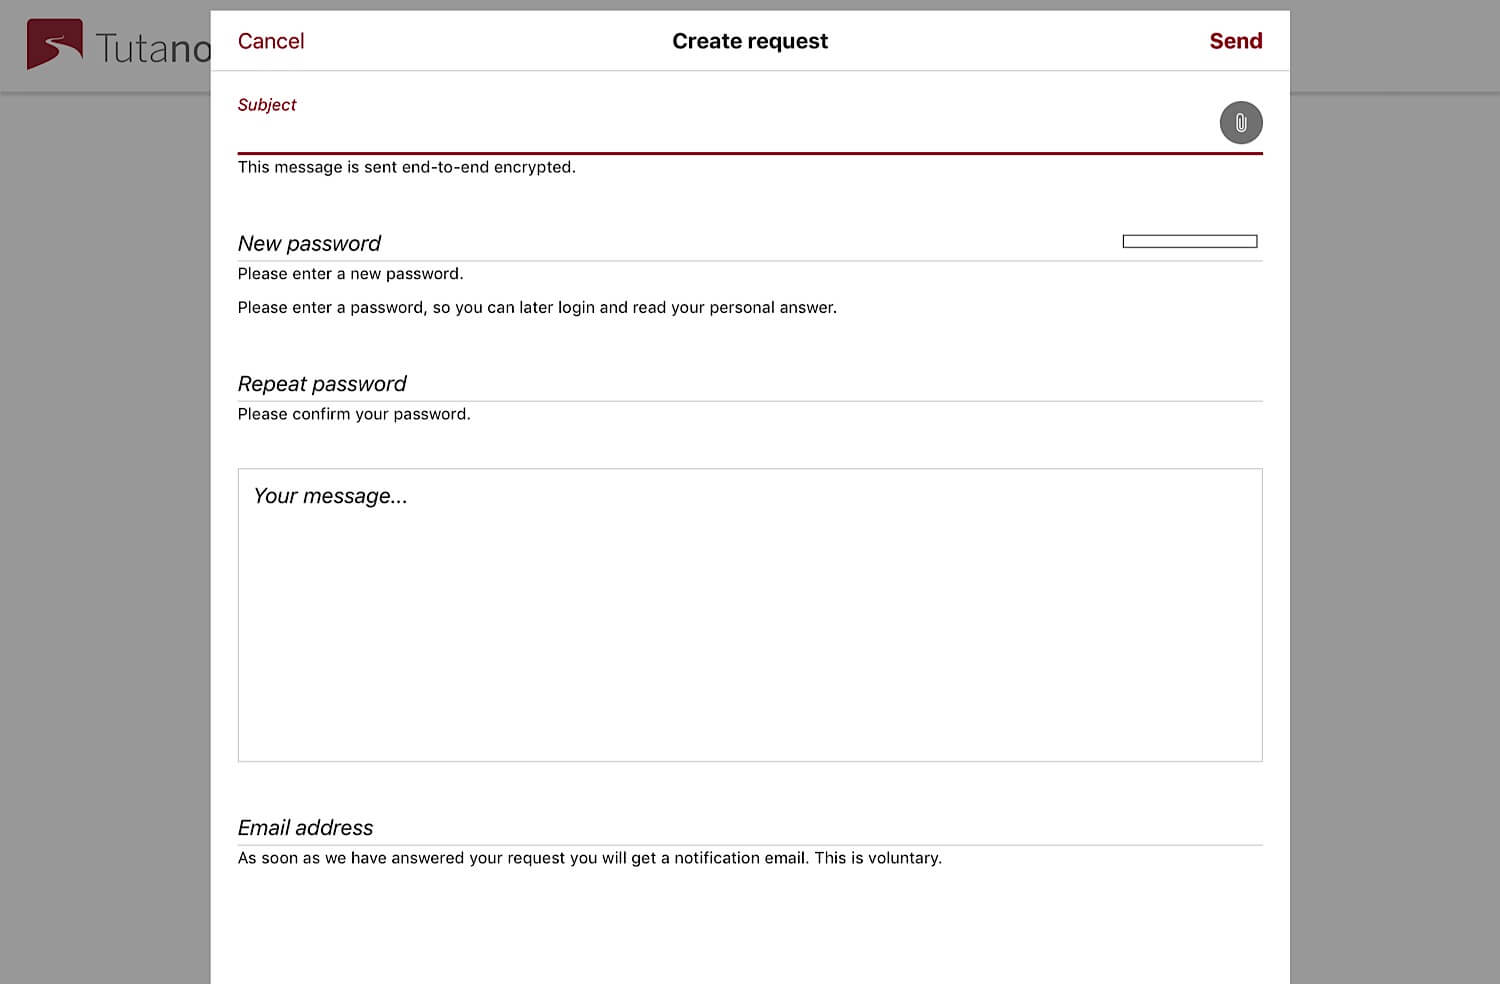 The Secure Connect “Create request” form.